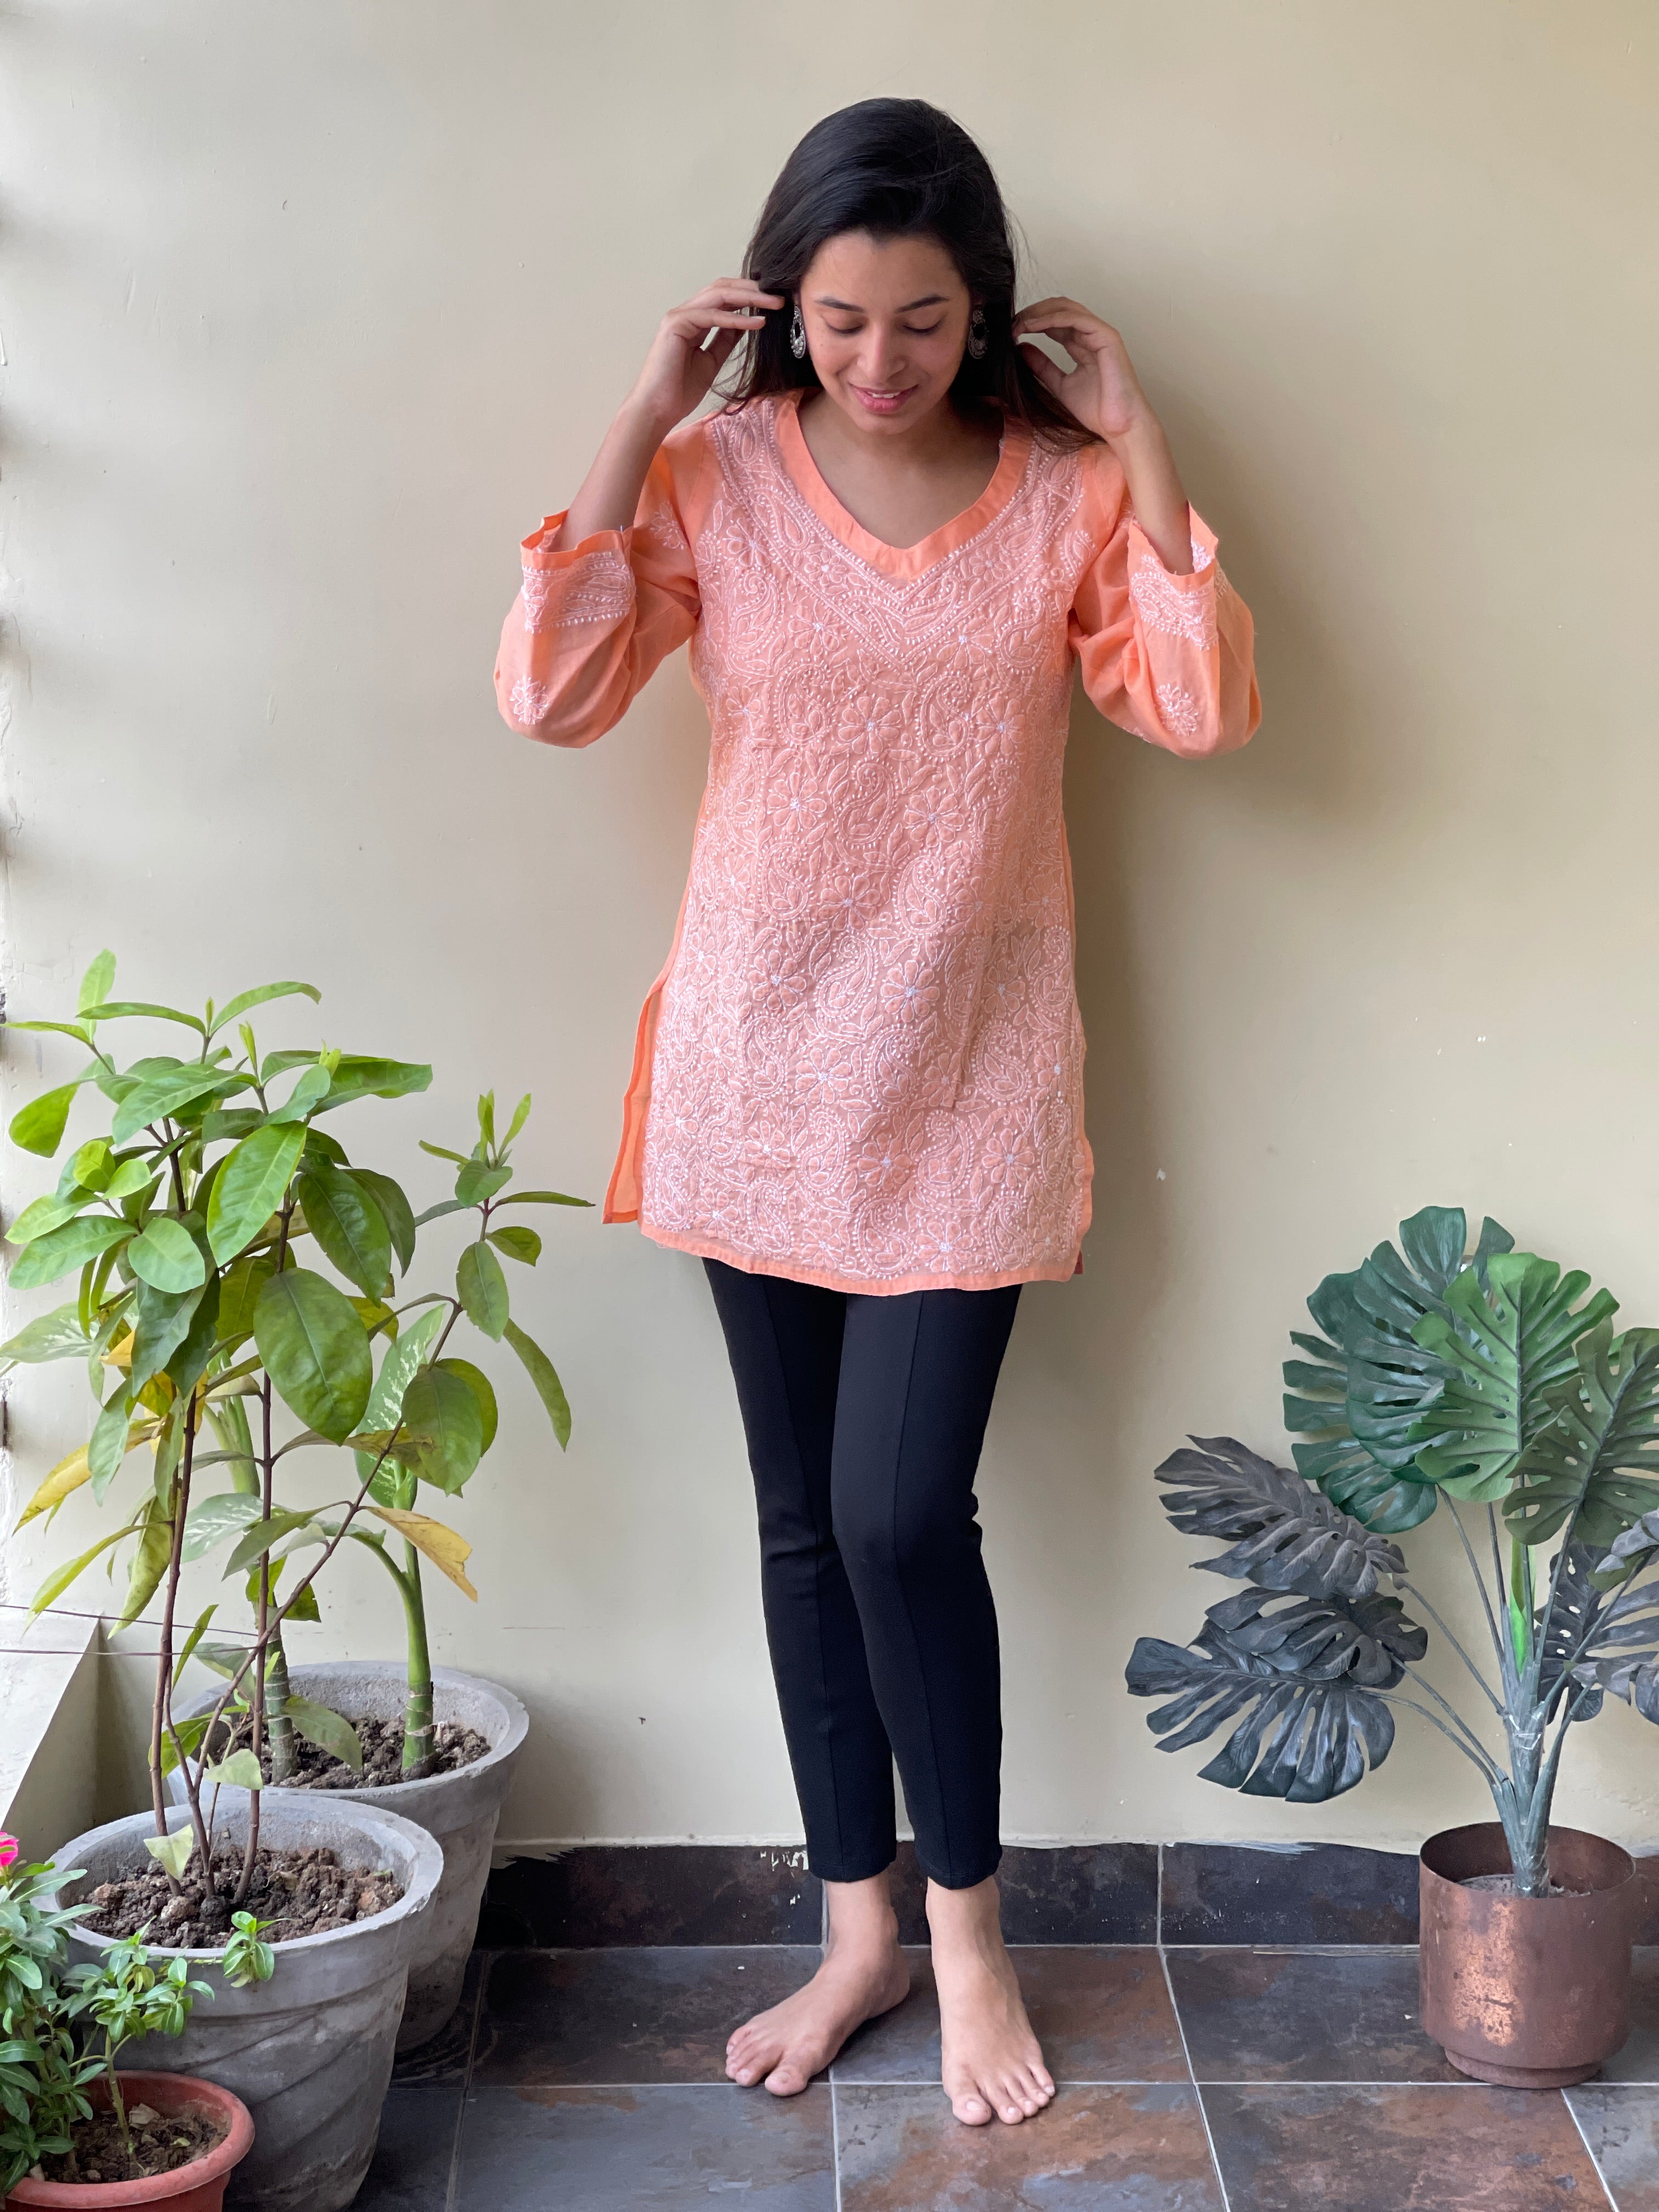 How to make your Short Kurti look more exciting?